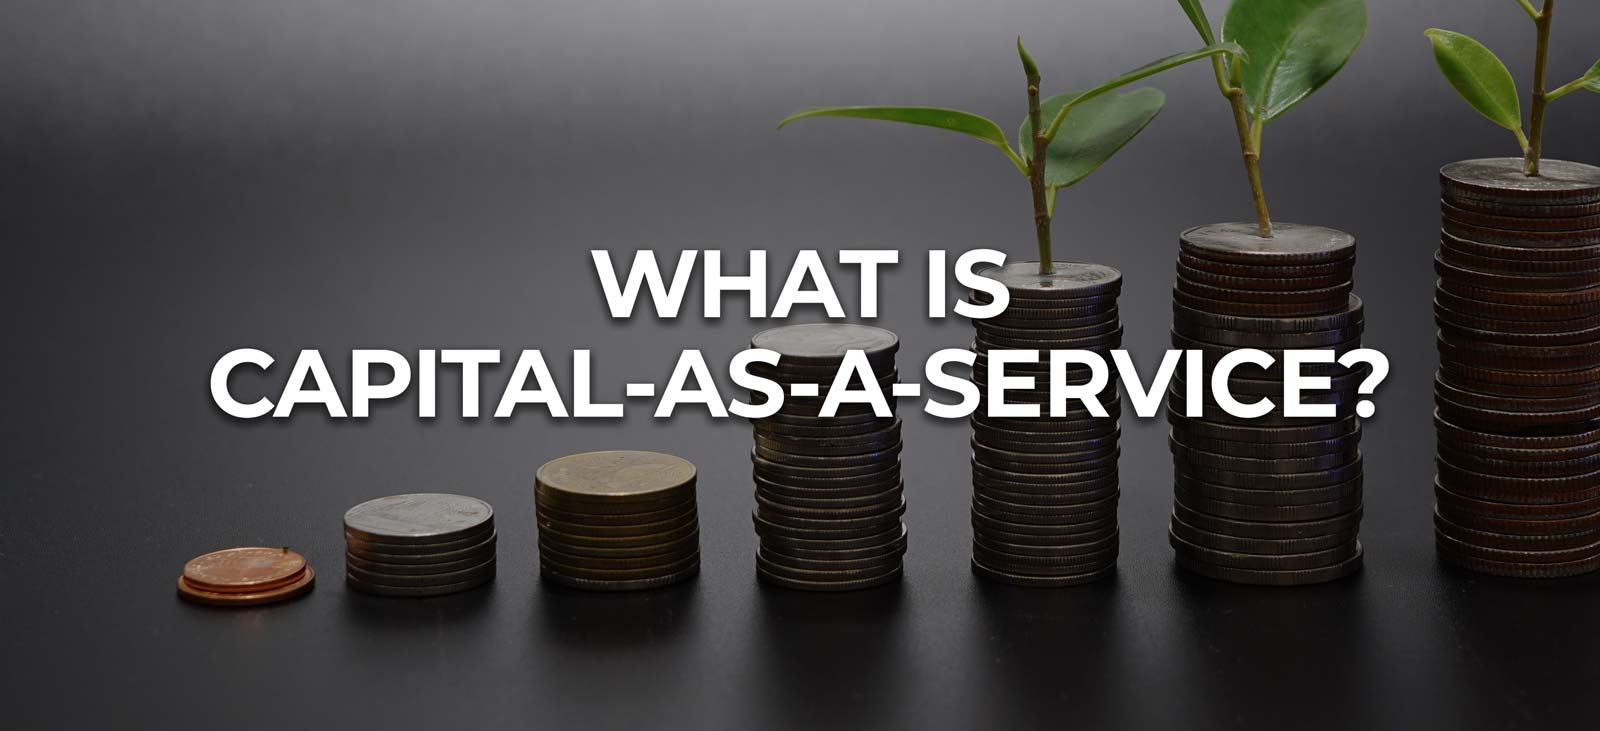 What is capital as a service? - image